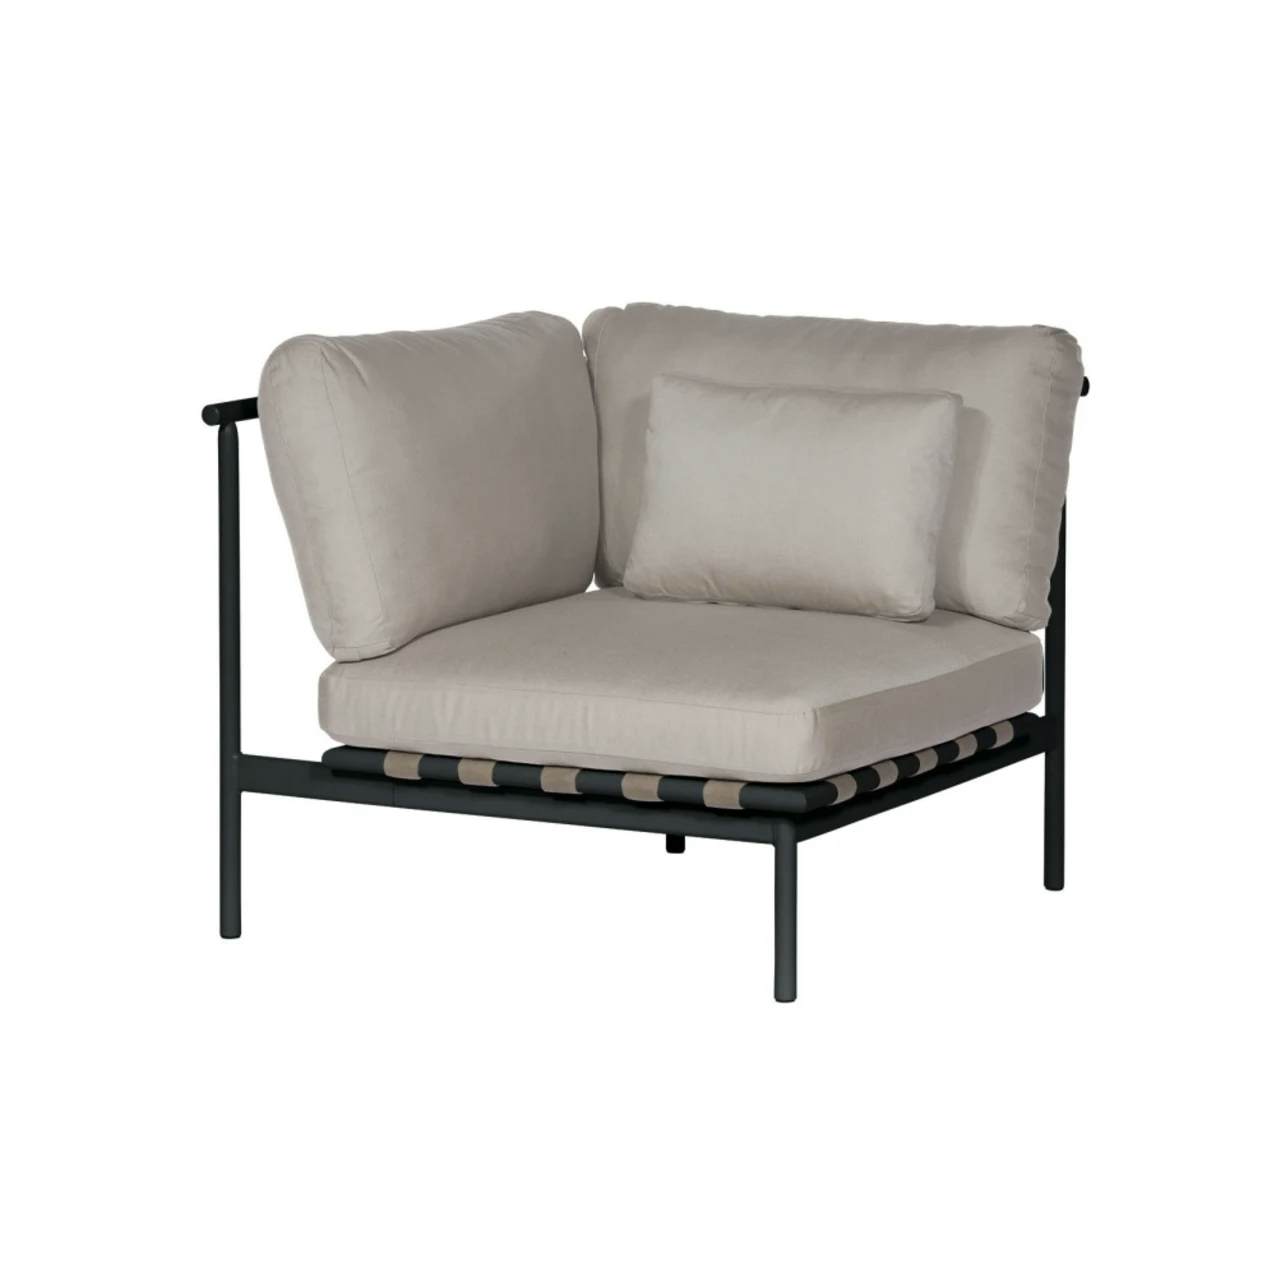 Barlow Tyrie Around Deep Seating Single Module - Left Arm | Forge Grey Aluminum Frame